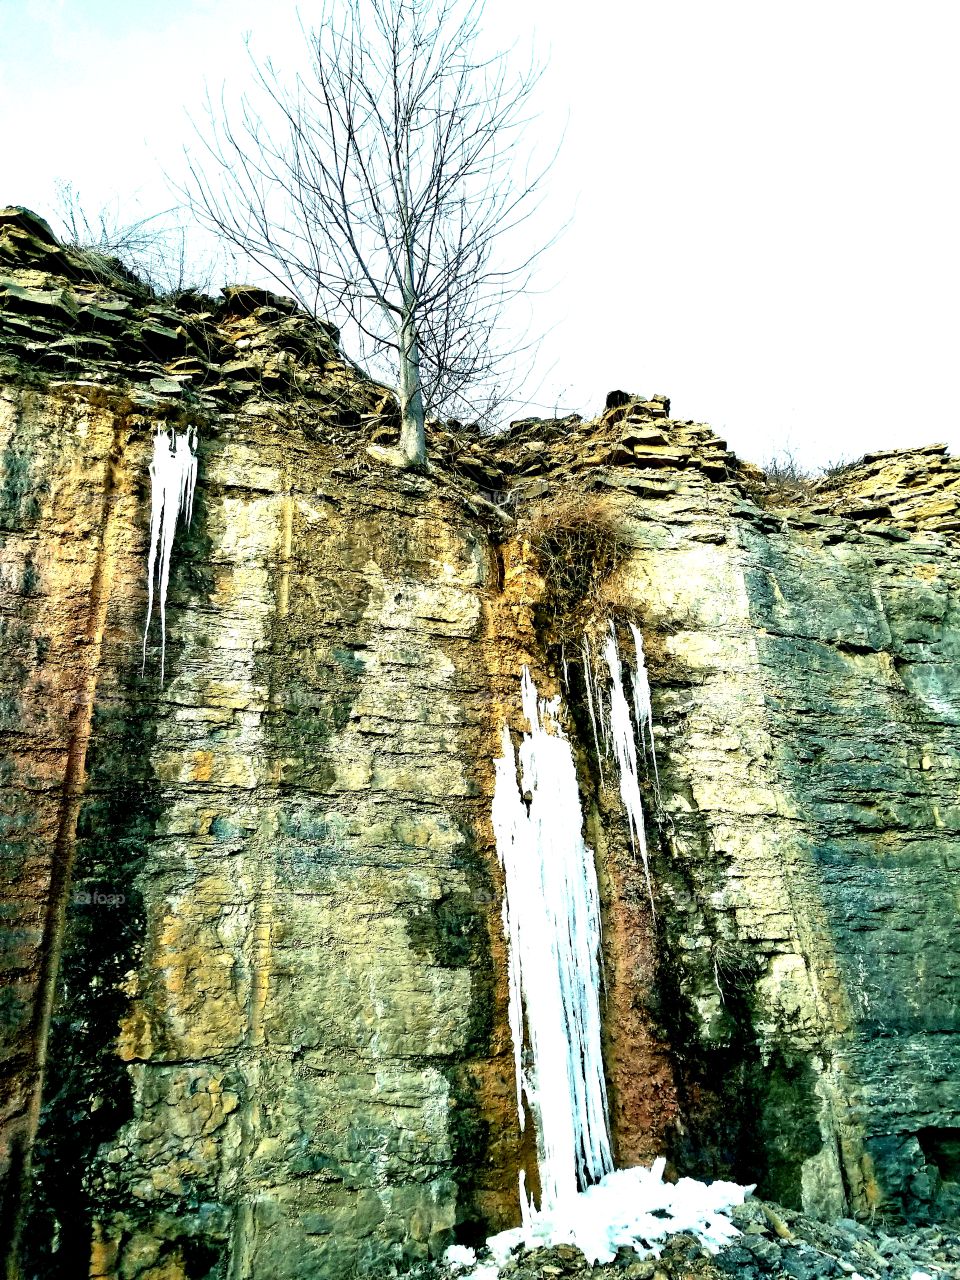 Tree struggling to remain atop icy rockface.